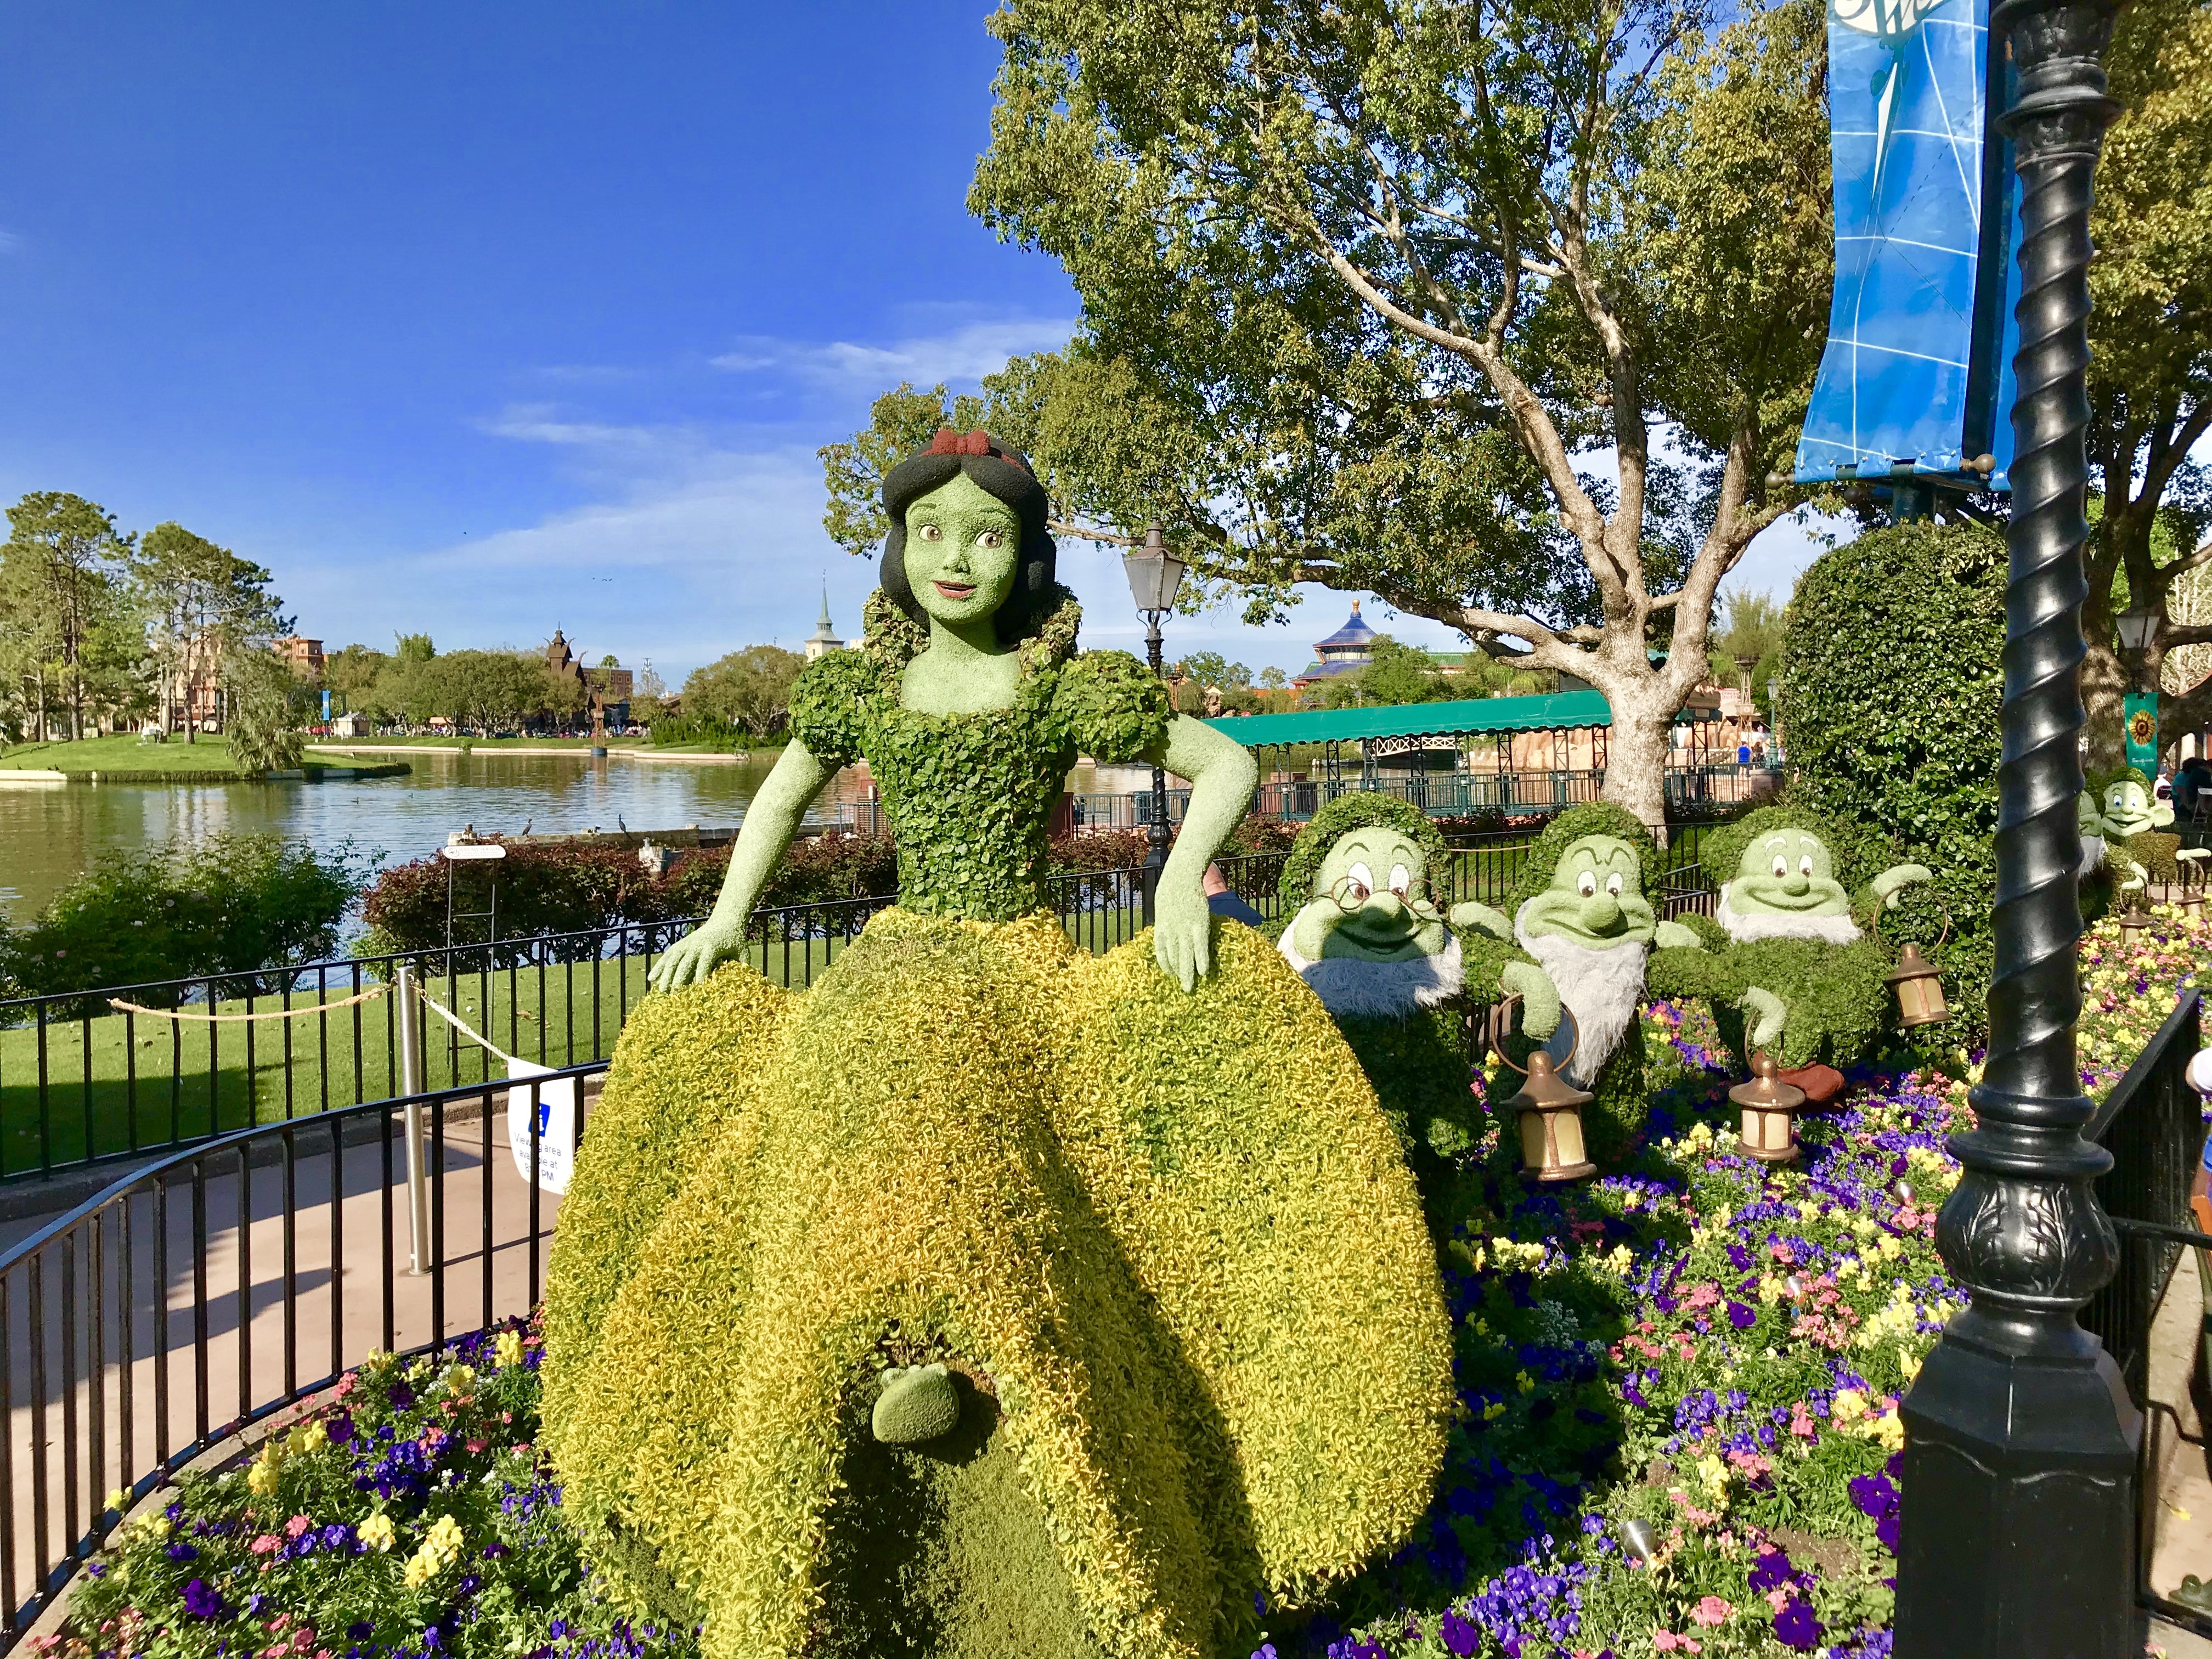 photo post: flower and garden festival at epcot - mickey chatter